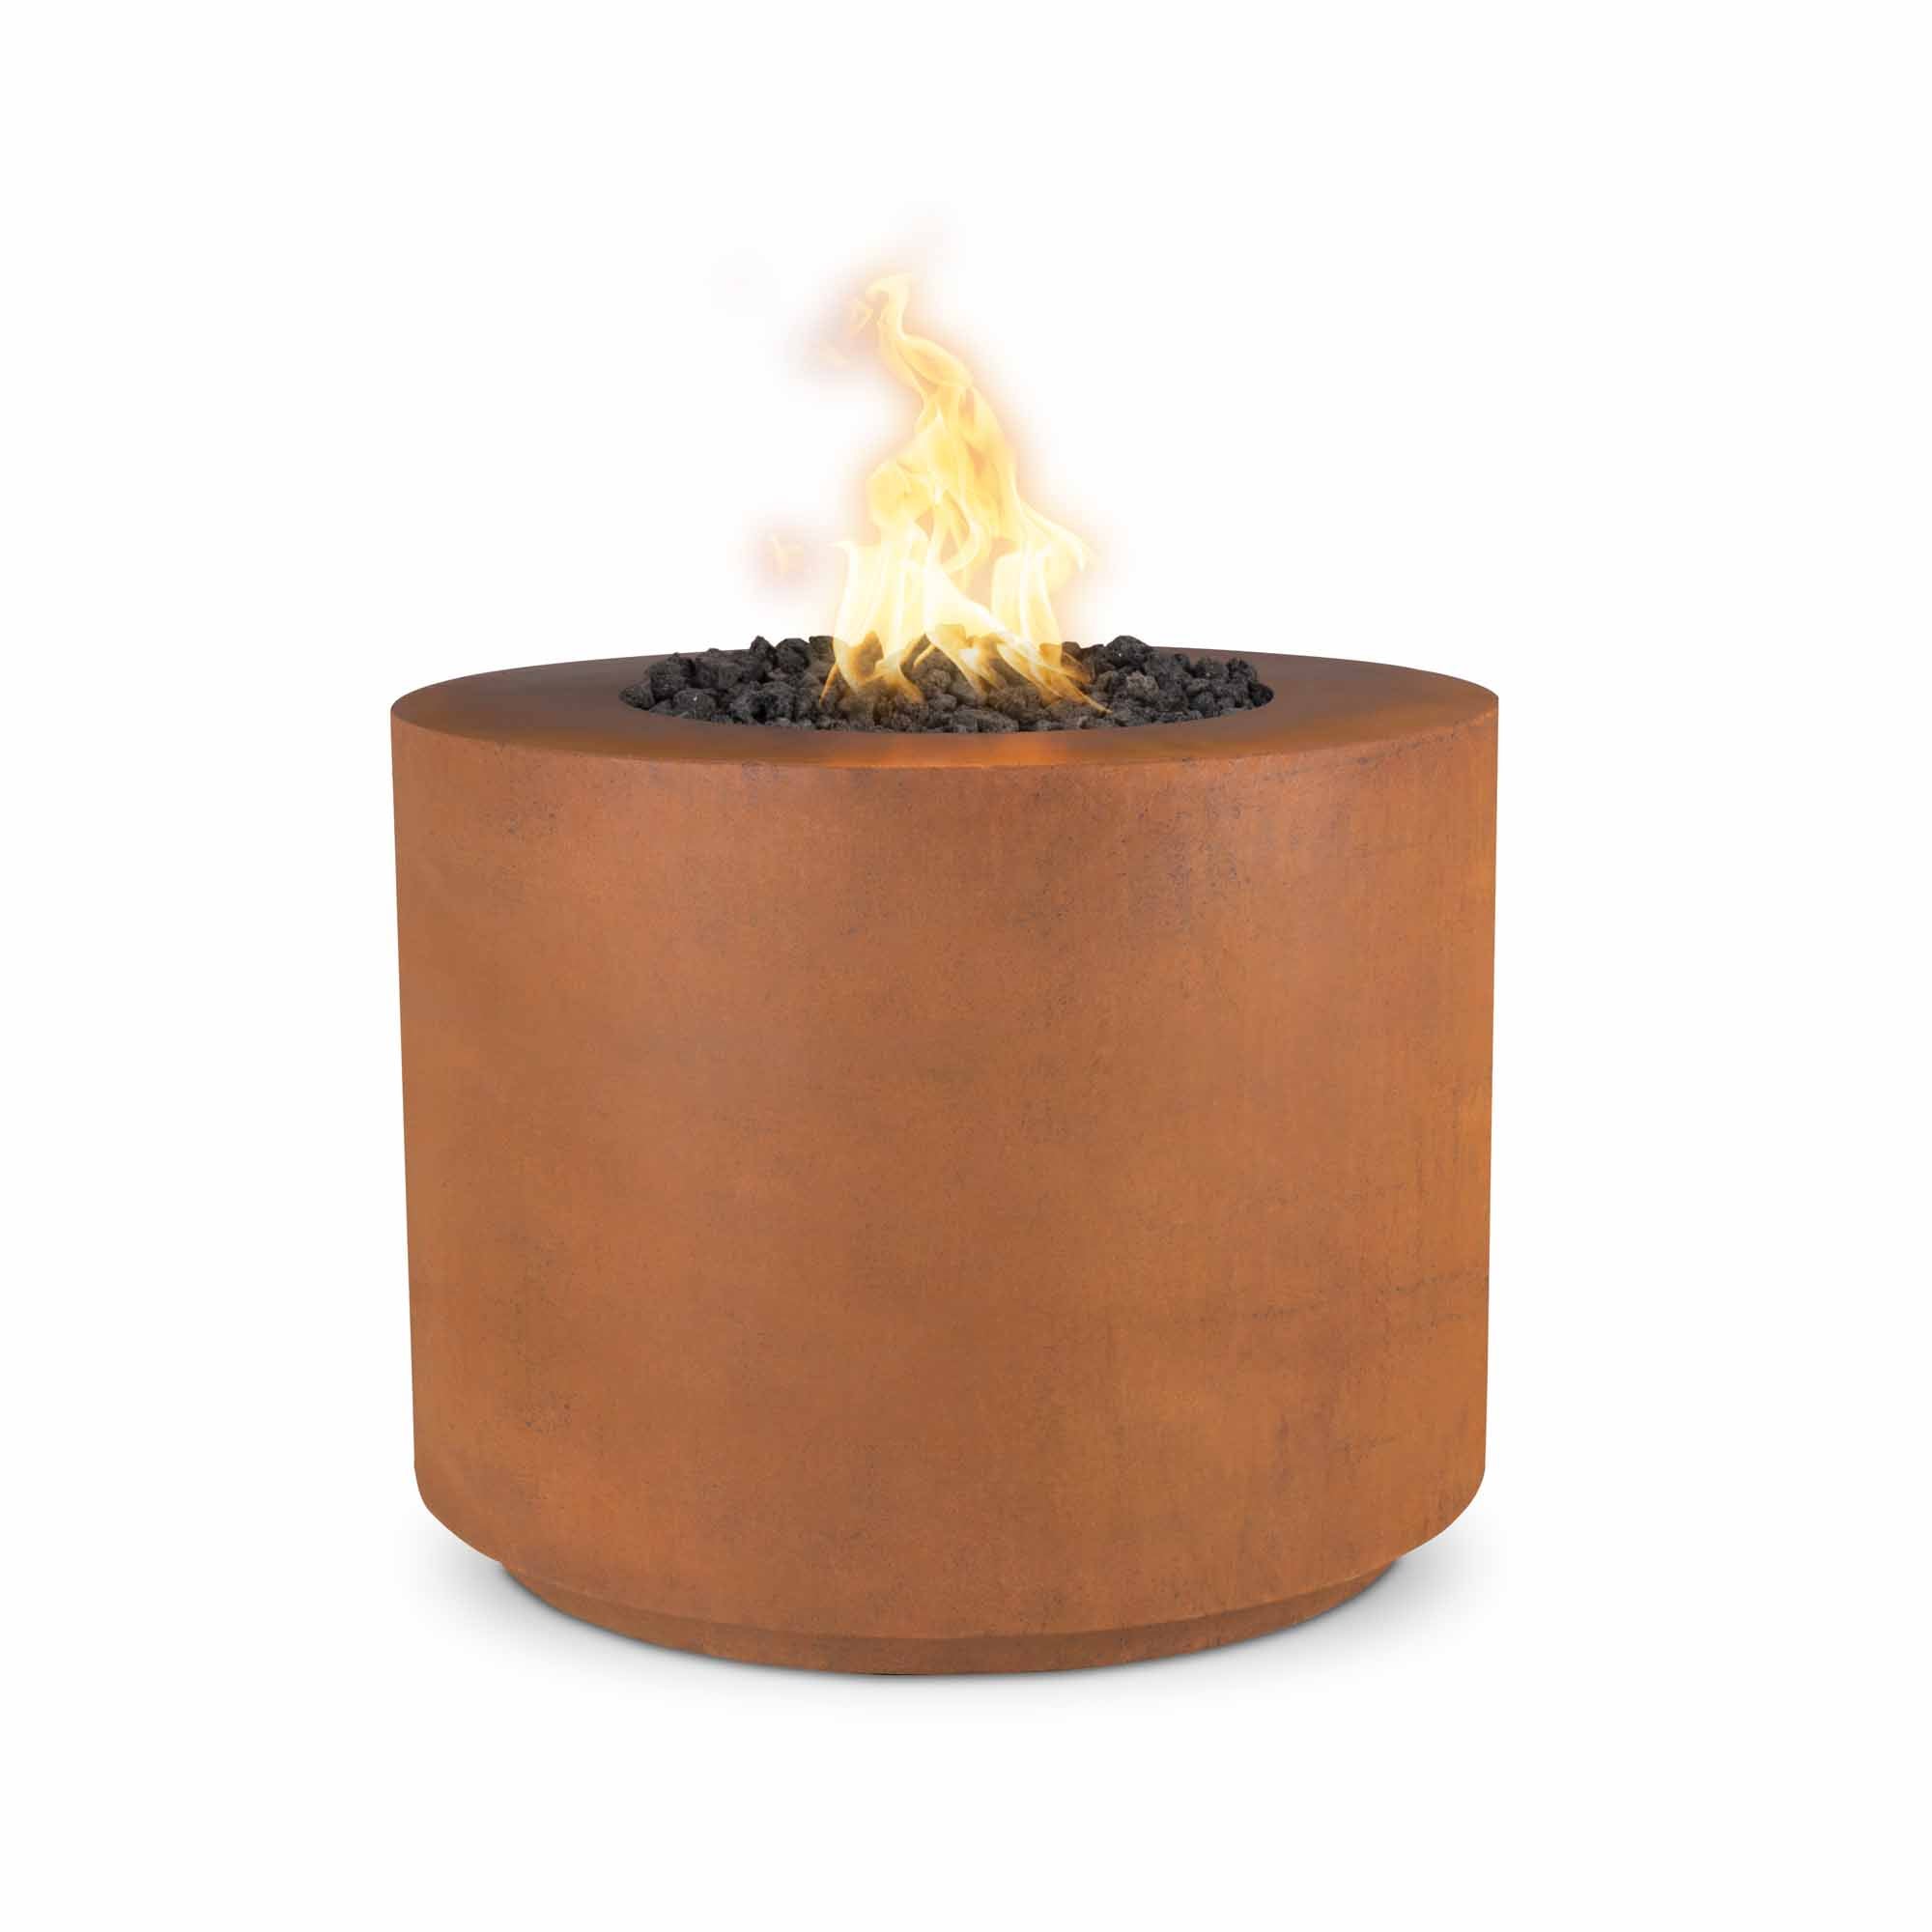 The Outdoor Plus Beverly Fire Pit Corten Steel OPT-XXRRCS - Serenity Provision